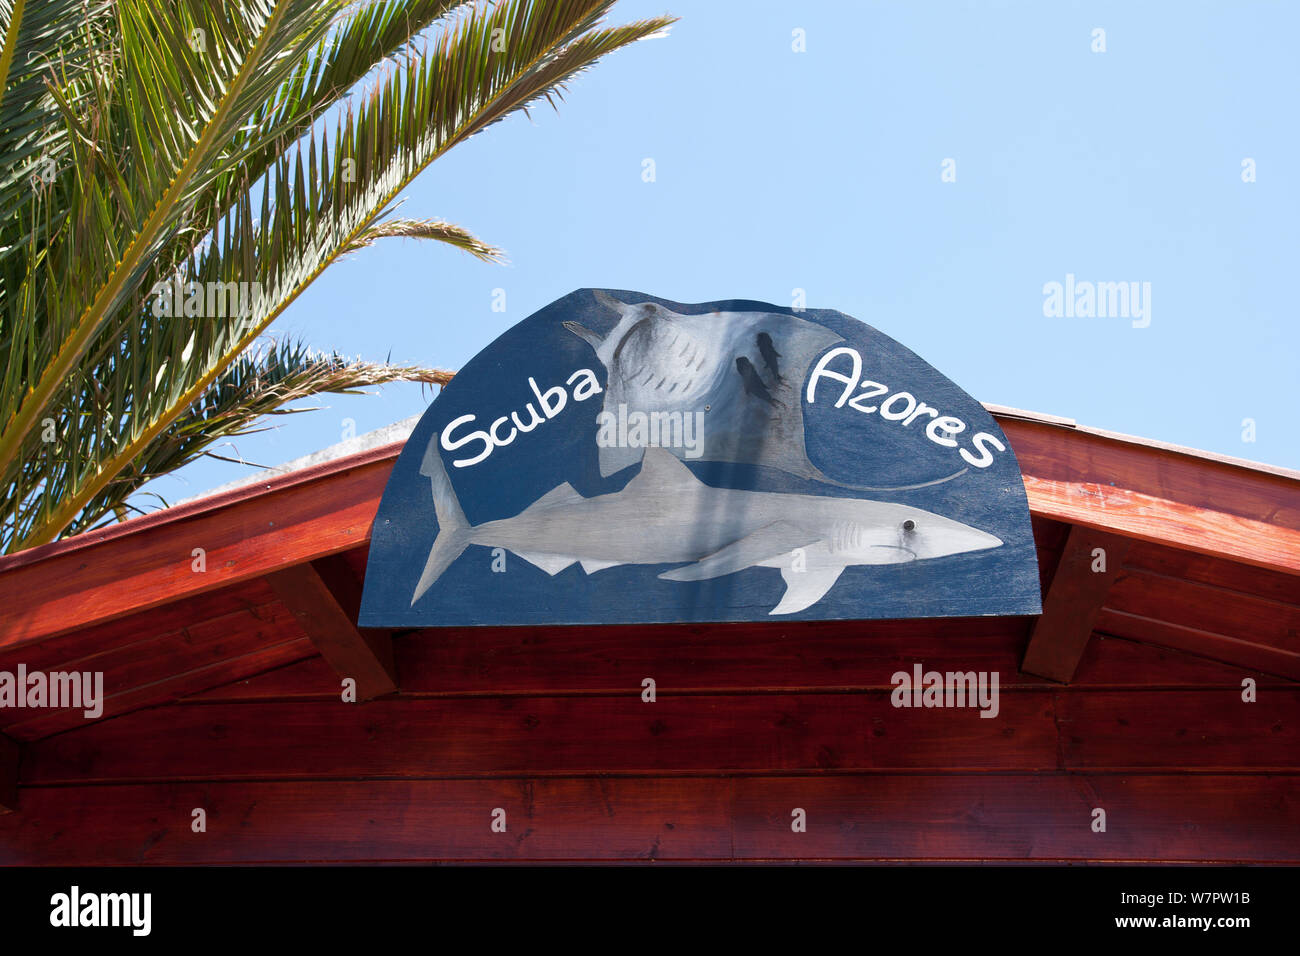 Scuba Azores sign with Great Blue shark, (Prionace glauca) image, Pico Island, Azores, Portugal, Atlantic Ocean Stock Photo